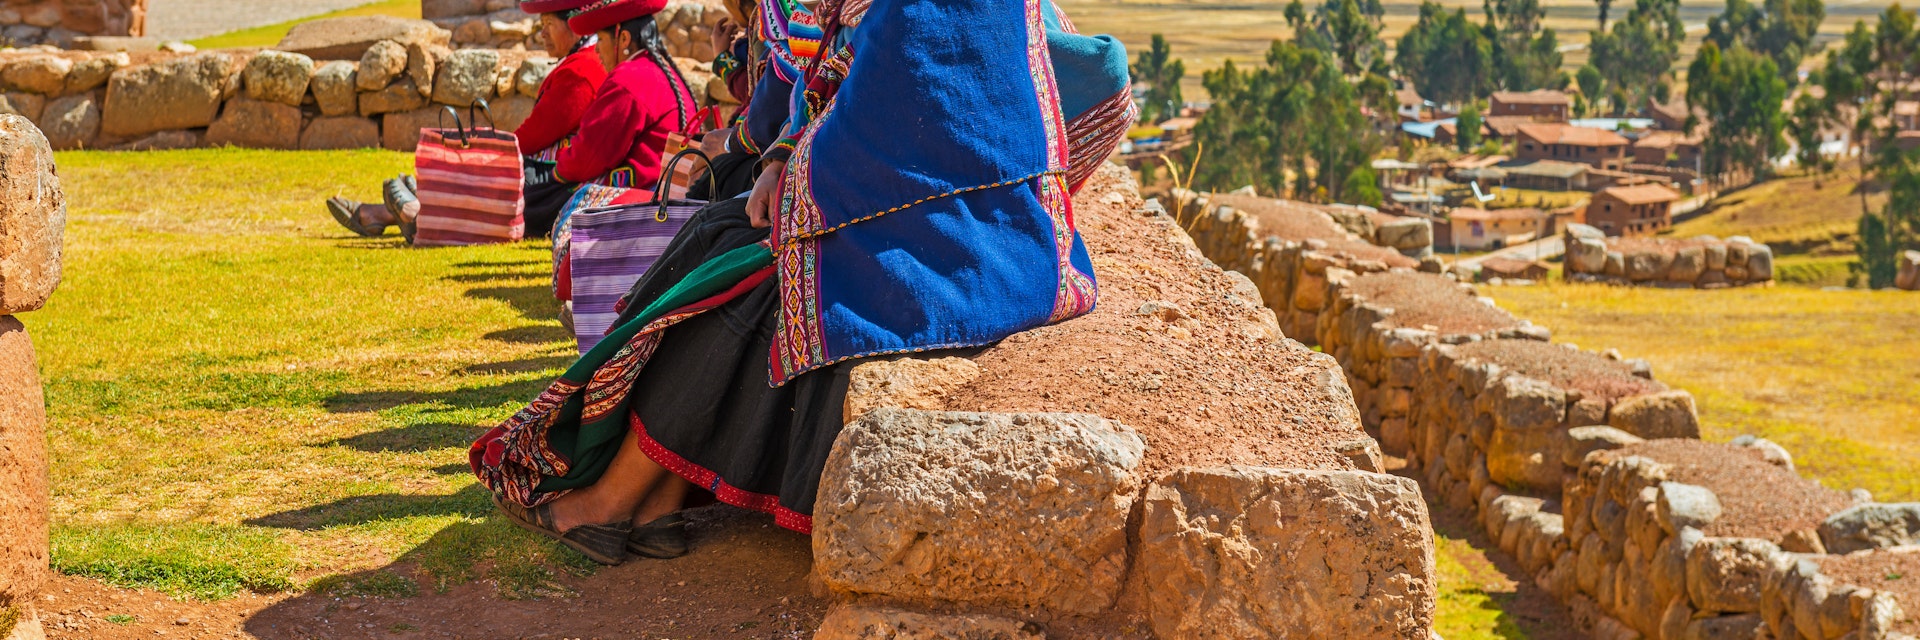 CHINCHEROS, PERU - JUNE 23, 2013: A group of Quechua women sitting on an ancient Inca wall in an archaeological site during a social gathering, all in traditional clothing at sunset near Cusco city.